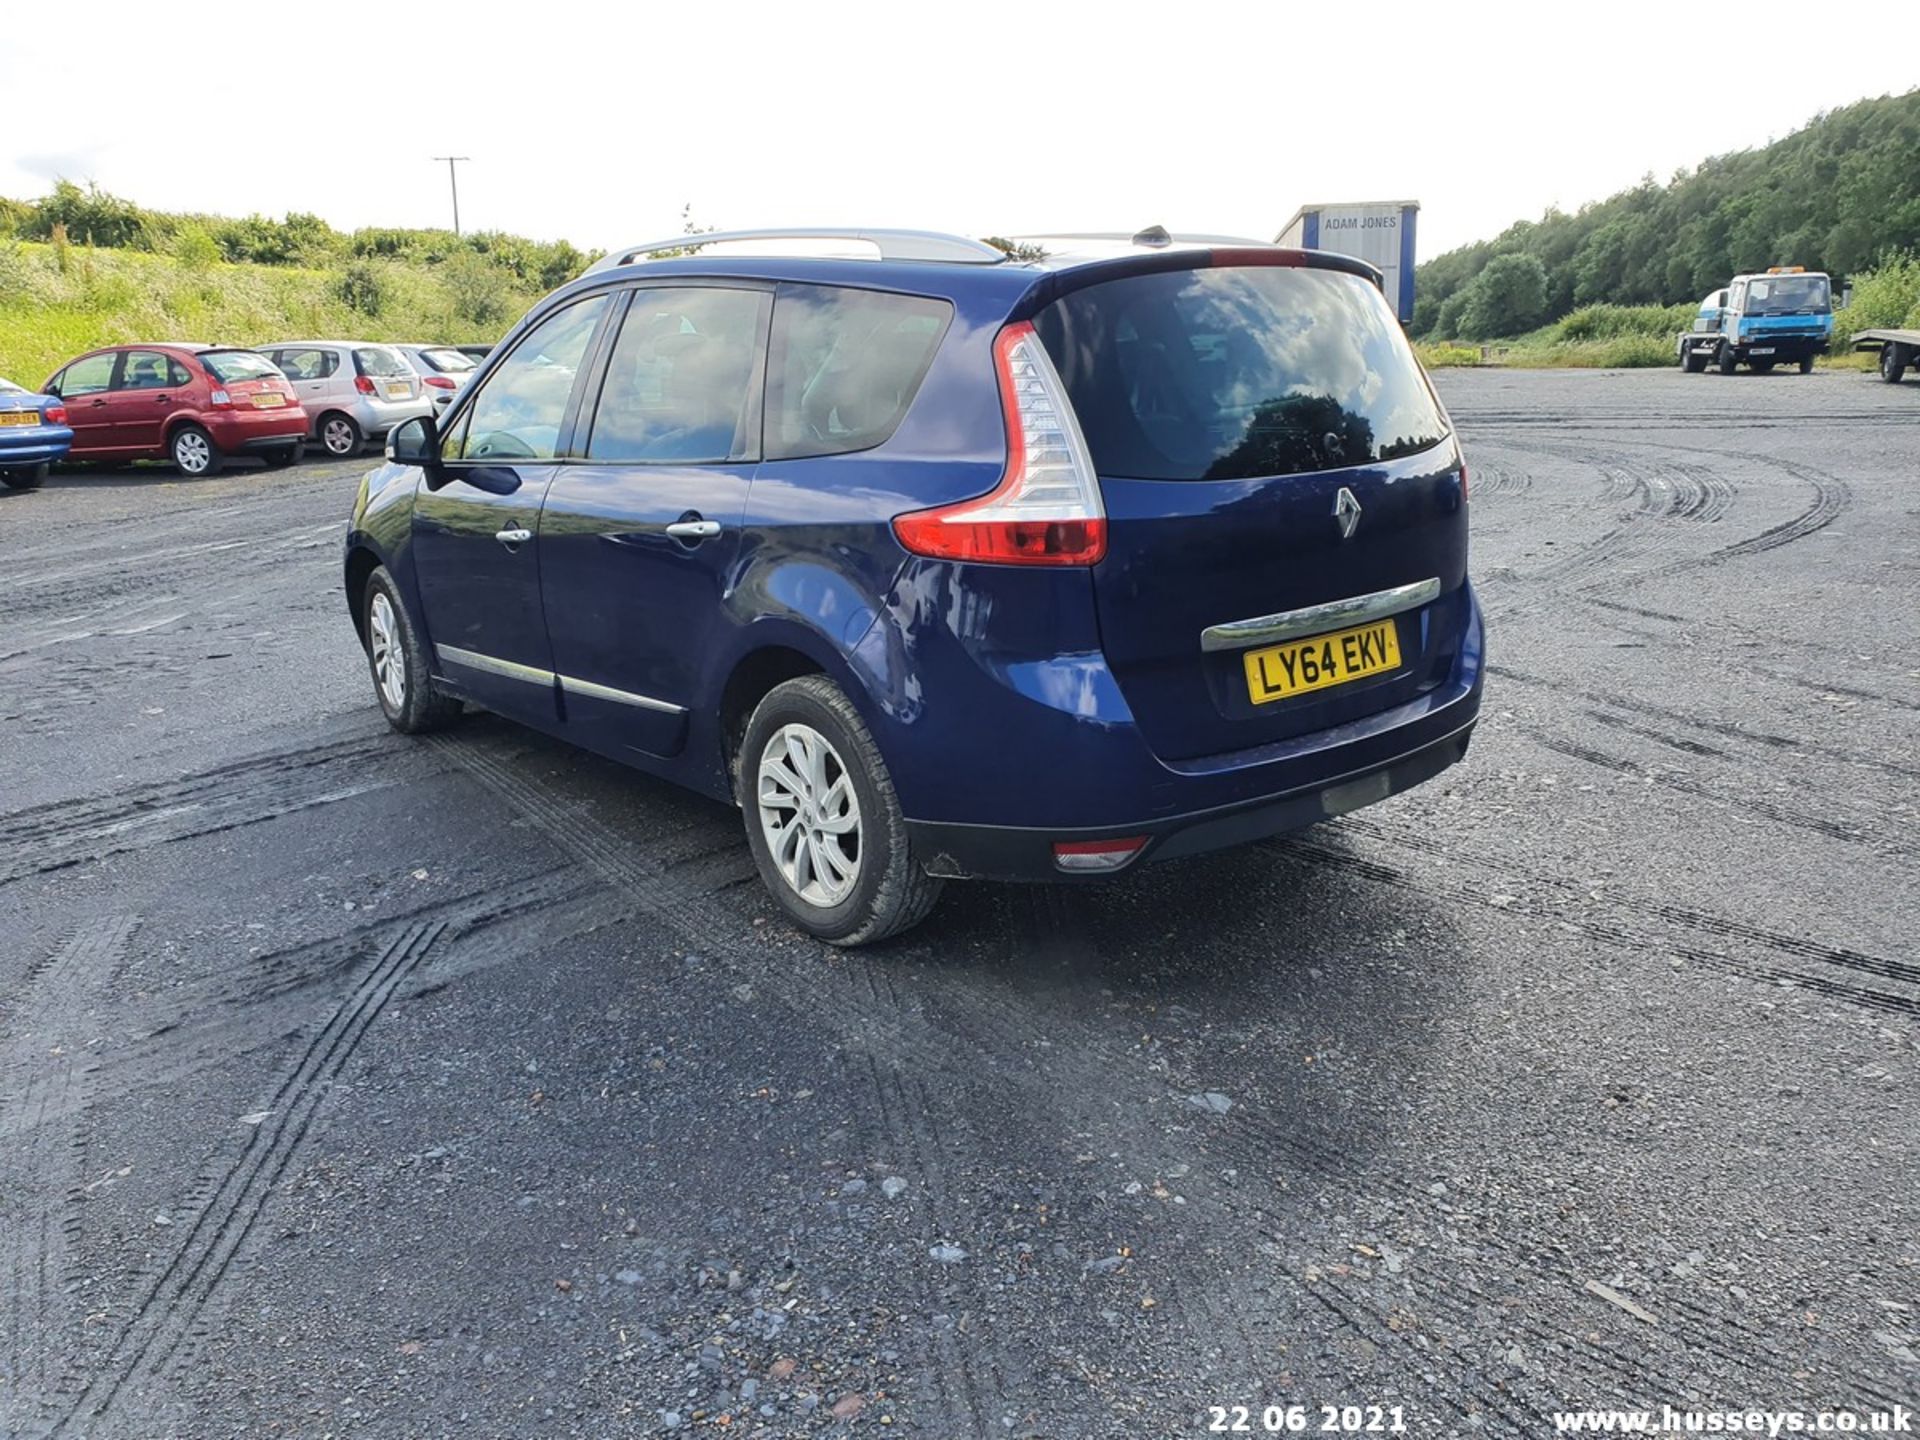 14/64 RENAULT GRAND SCENIC DY-QUE T-T D - 1461cc 5dr MPV (Blue, 152k) - Image 20 of 23